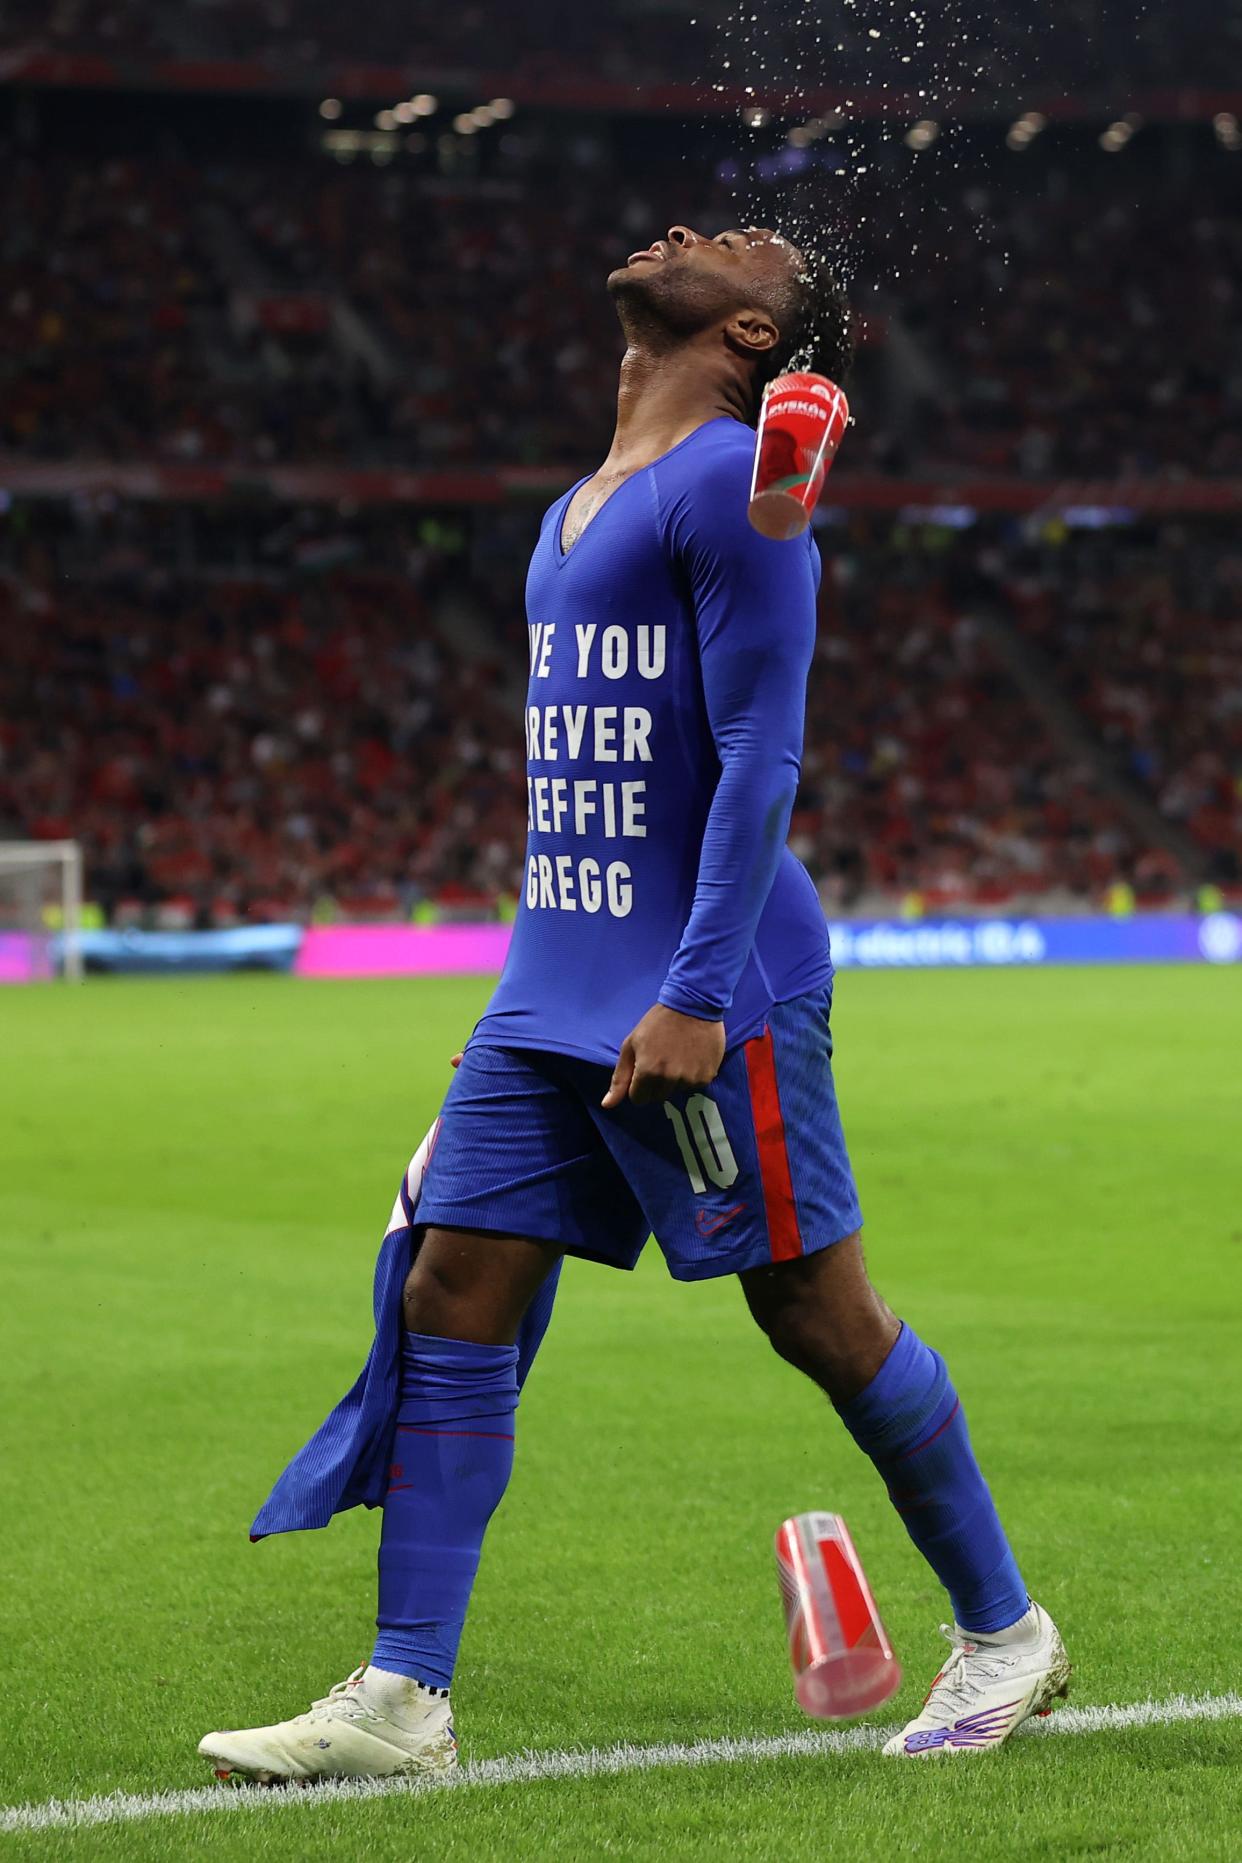 Raheem Sterling of England celebrates after scoring their team's first goal wearing a t-shirt that reads "Love You Forever Steffie Gregg" during the 2022 FIFA World Cup Qualifier match between Hungary and England at Stadium Puskas Ferenc on September 02, 2021 in Budapest, Hungary.